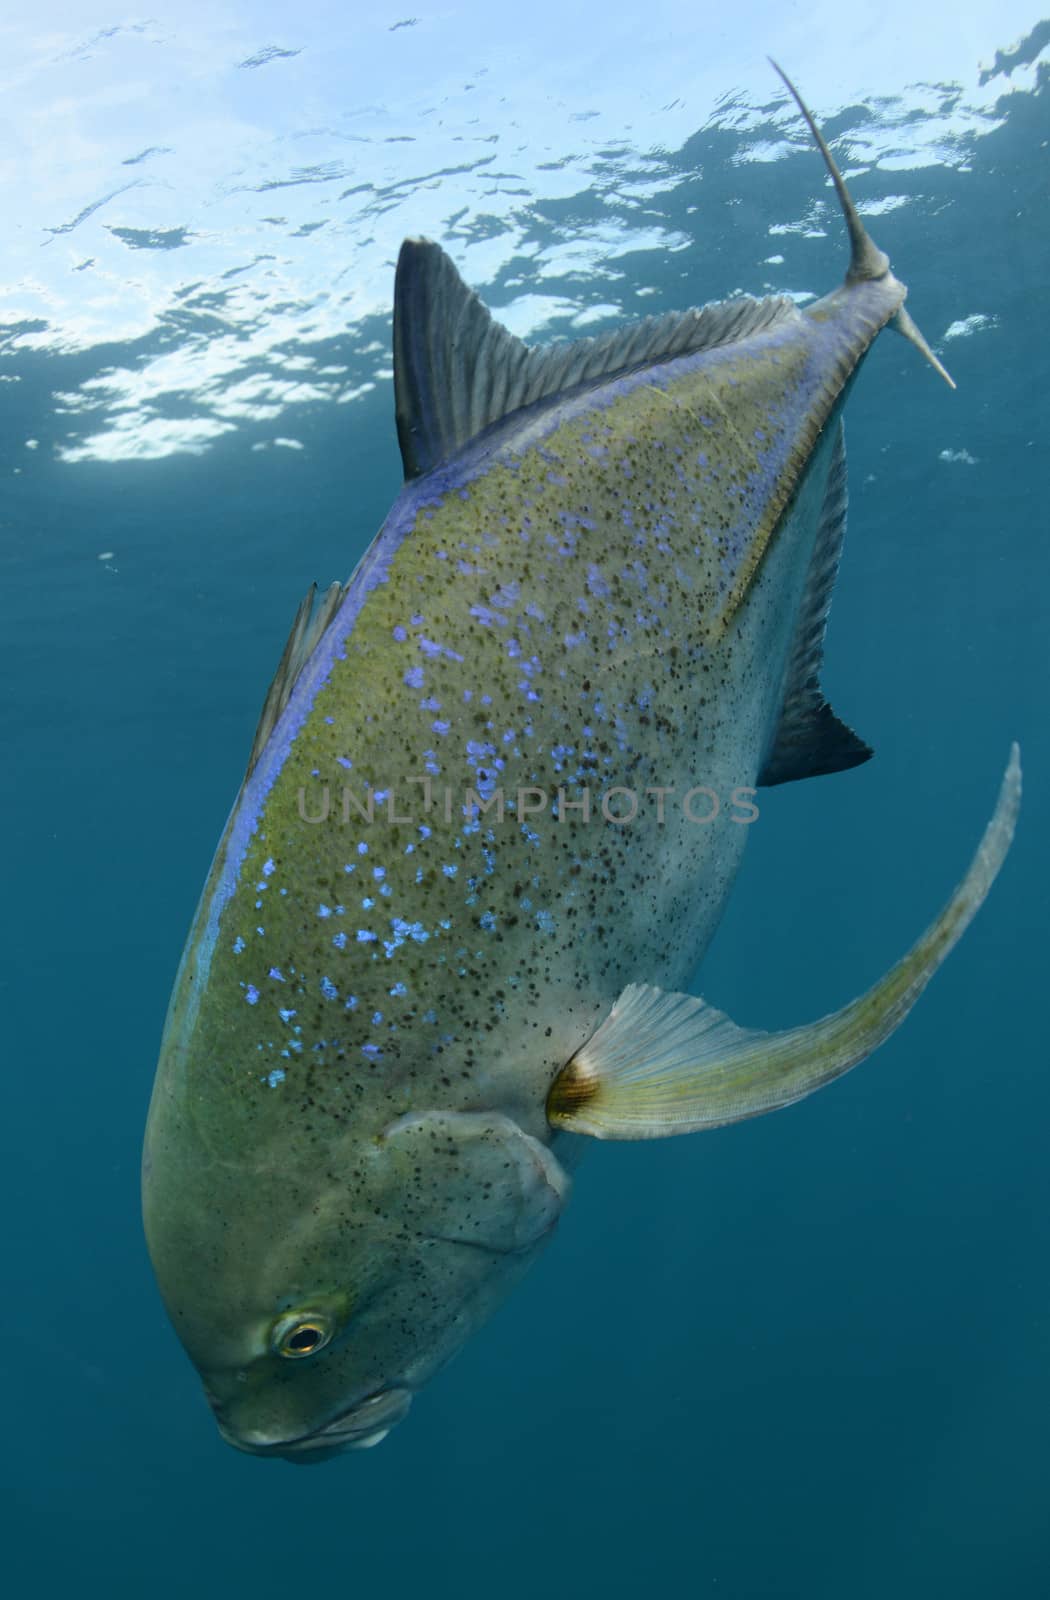 Bluefin trevally fish swimming and its natural habitat by ftlaudgirl